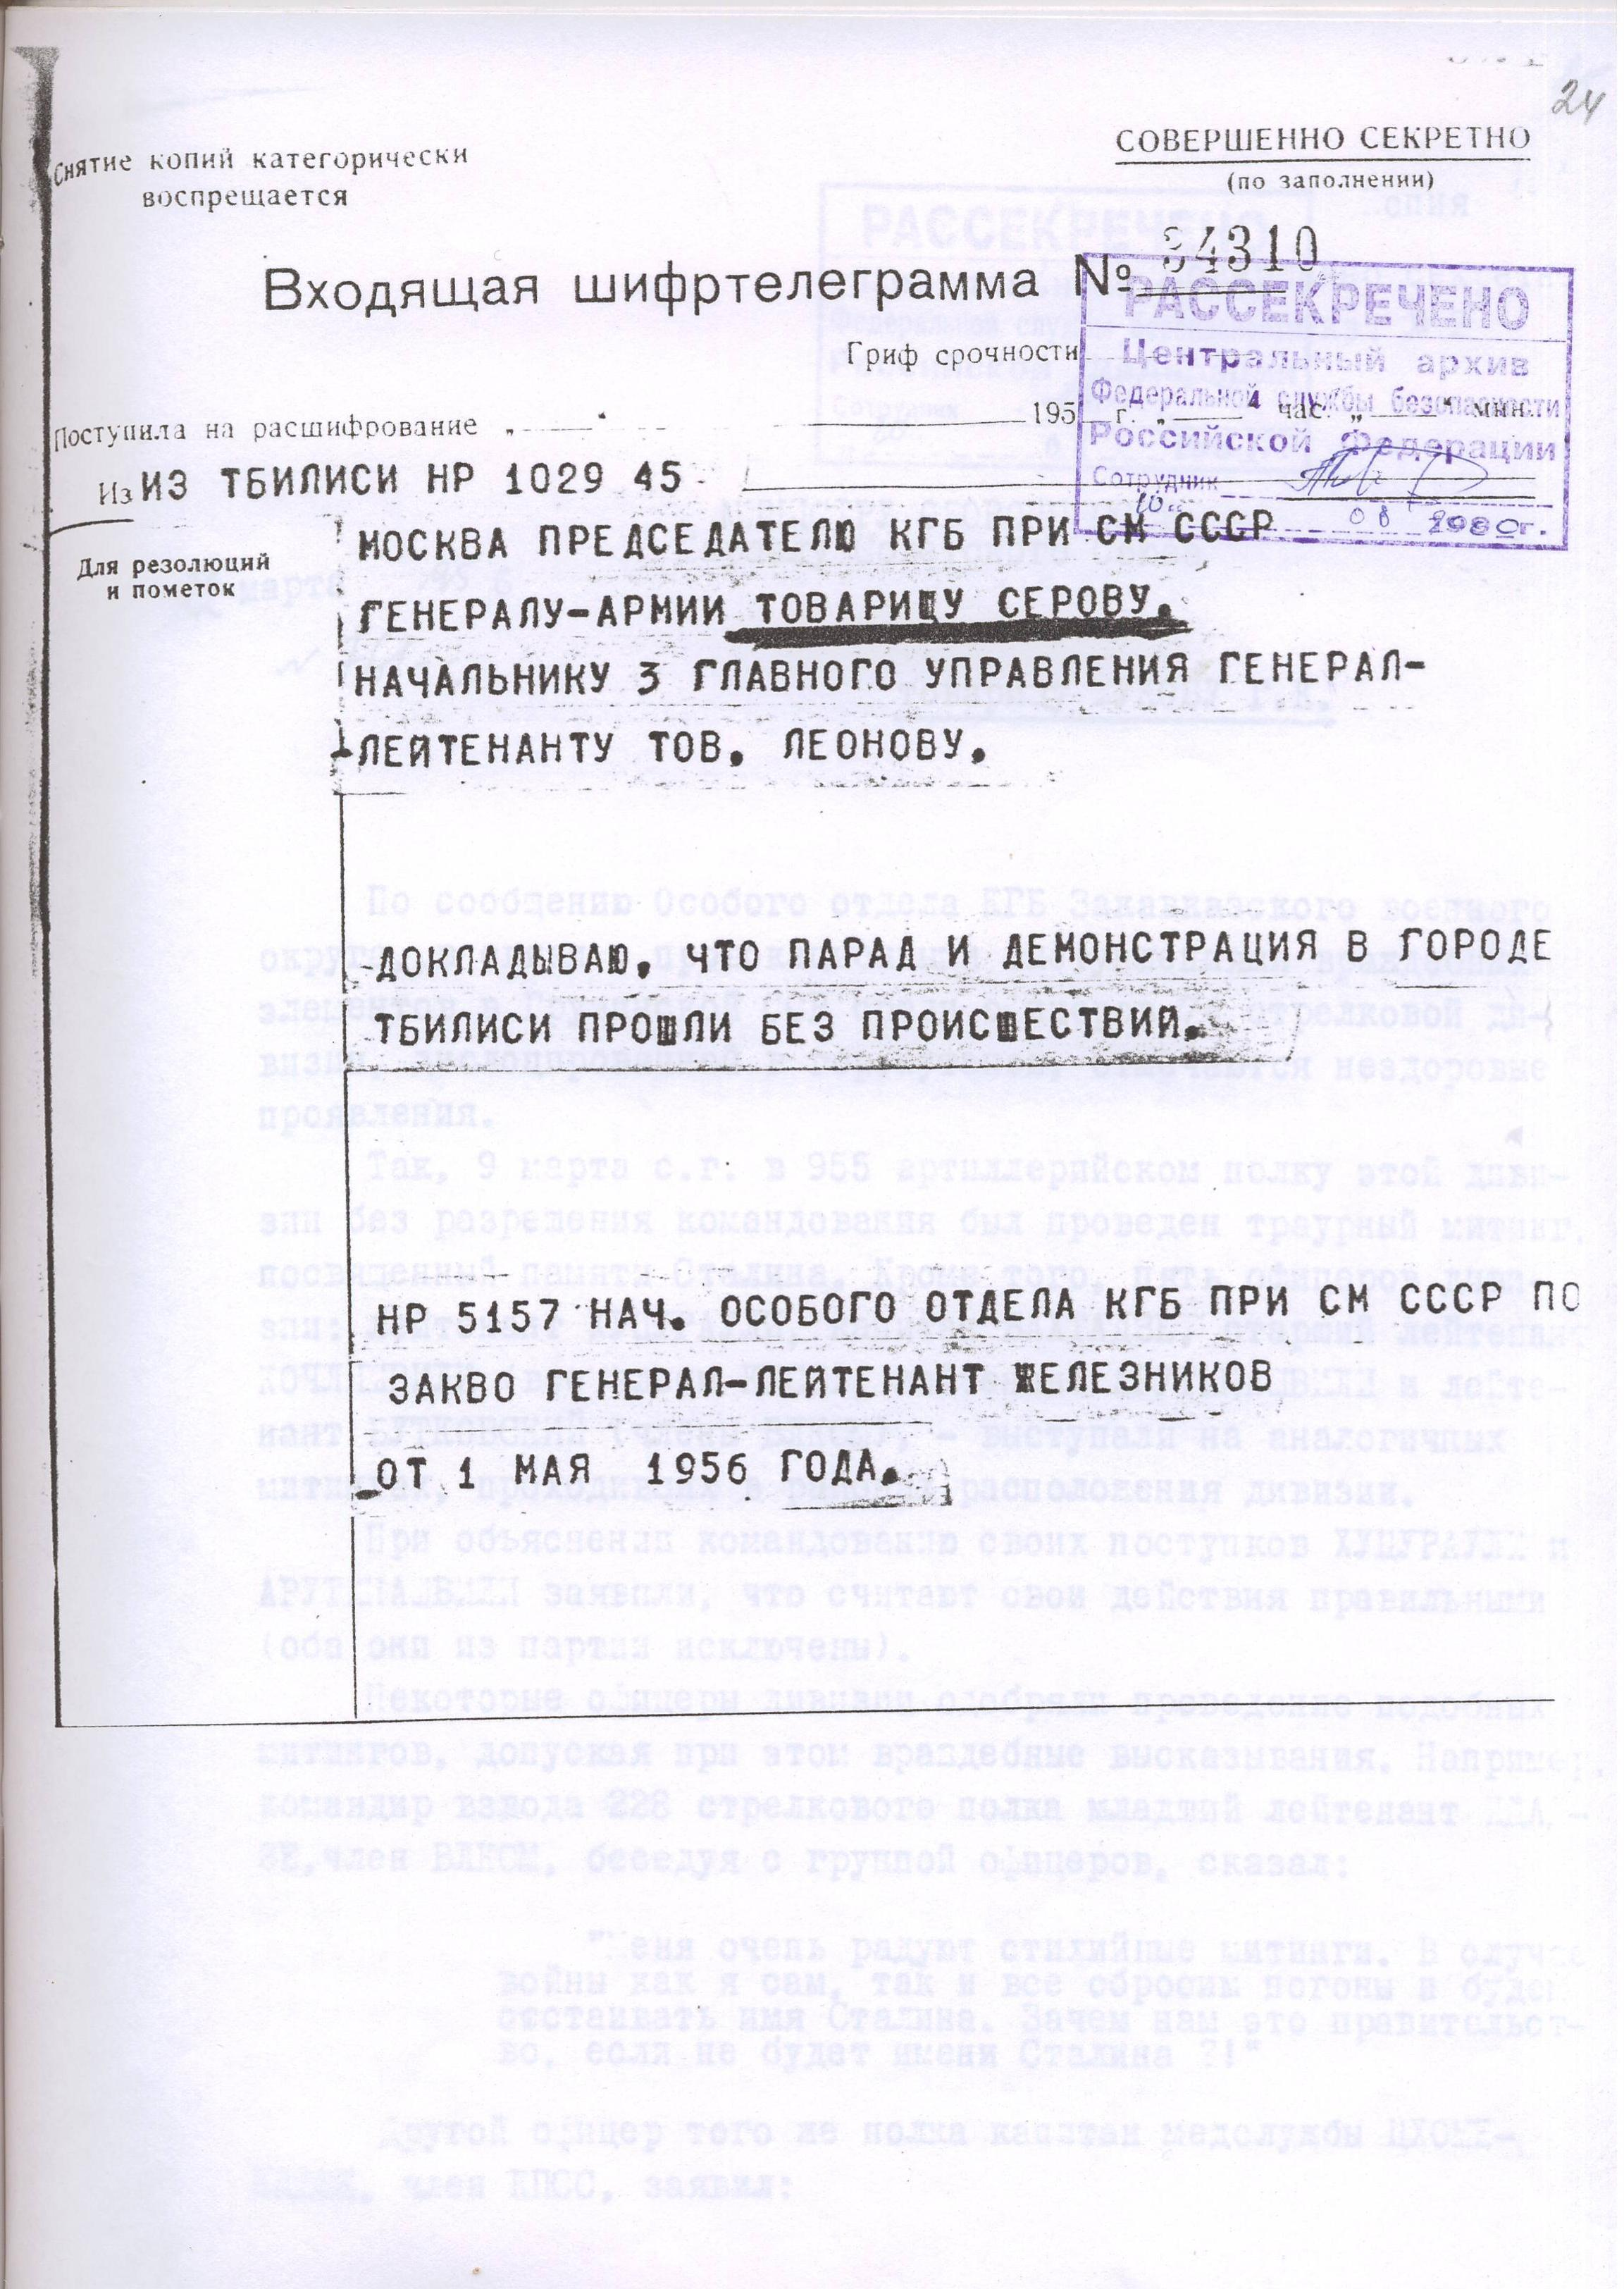 In a Top Secret cipher telegram, Lieutenant General Zheleznikov,informs Moscow, that the parade and demonstration in Tbilisi on May 1st, 1956 ended without any outrages. № 34310